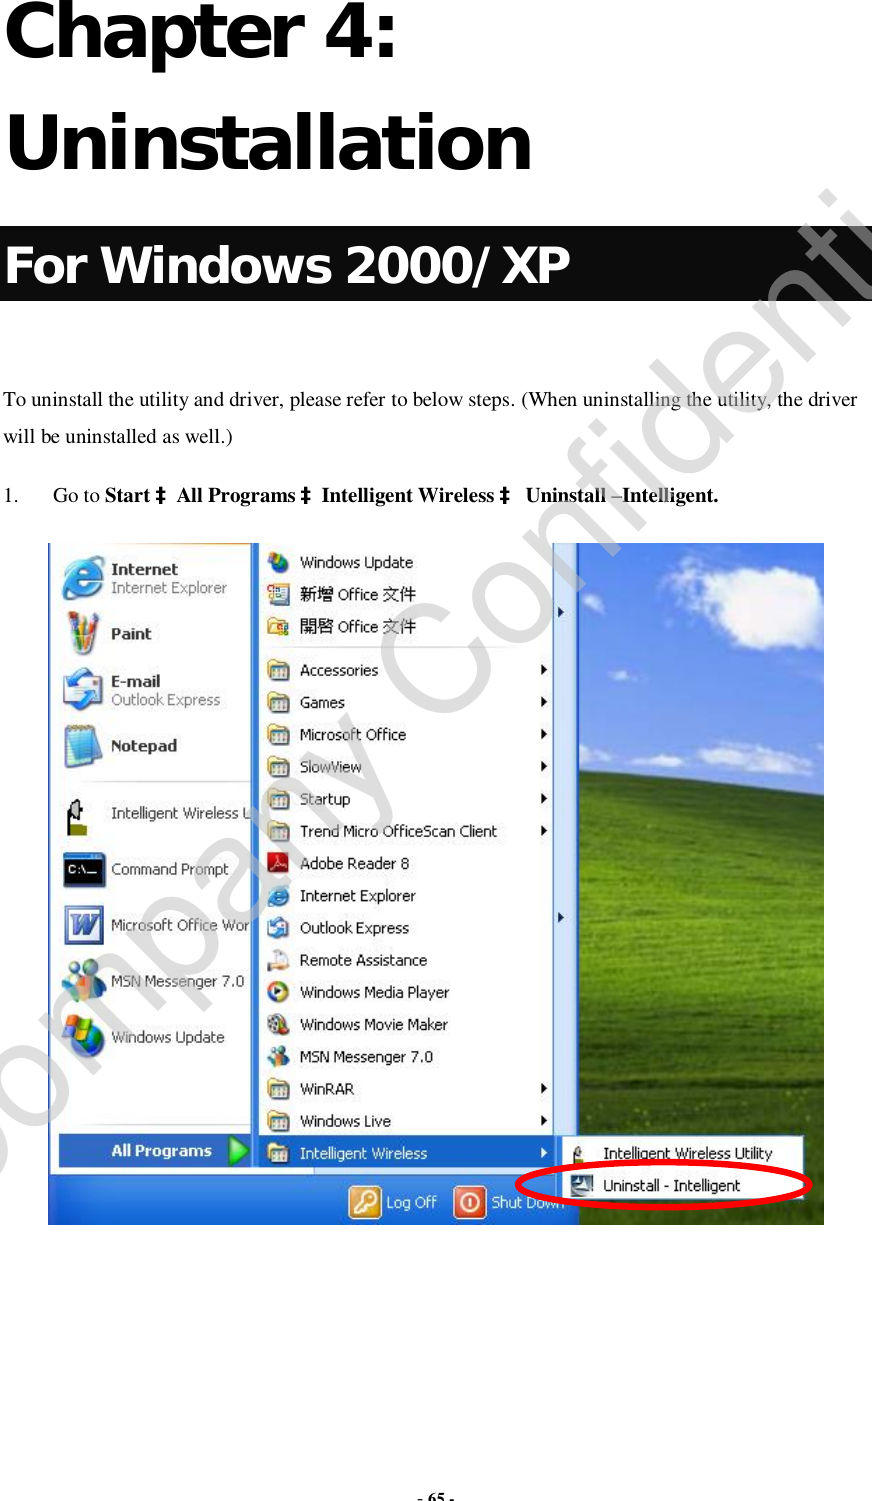  - 65 -  Chapter 4: Uninstallation For Windows 2000/XP  To uninstall the utility and driver, please refer to below steps. (When uninstalling the utility, the driver will be uninstalled as well.) 1. Go to Start àAll Programs àIntelligent Wireless à Uninstall –Intelligent.       Company Confidential